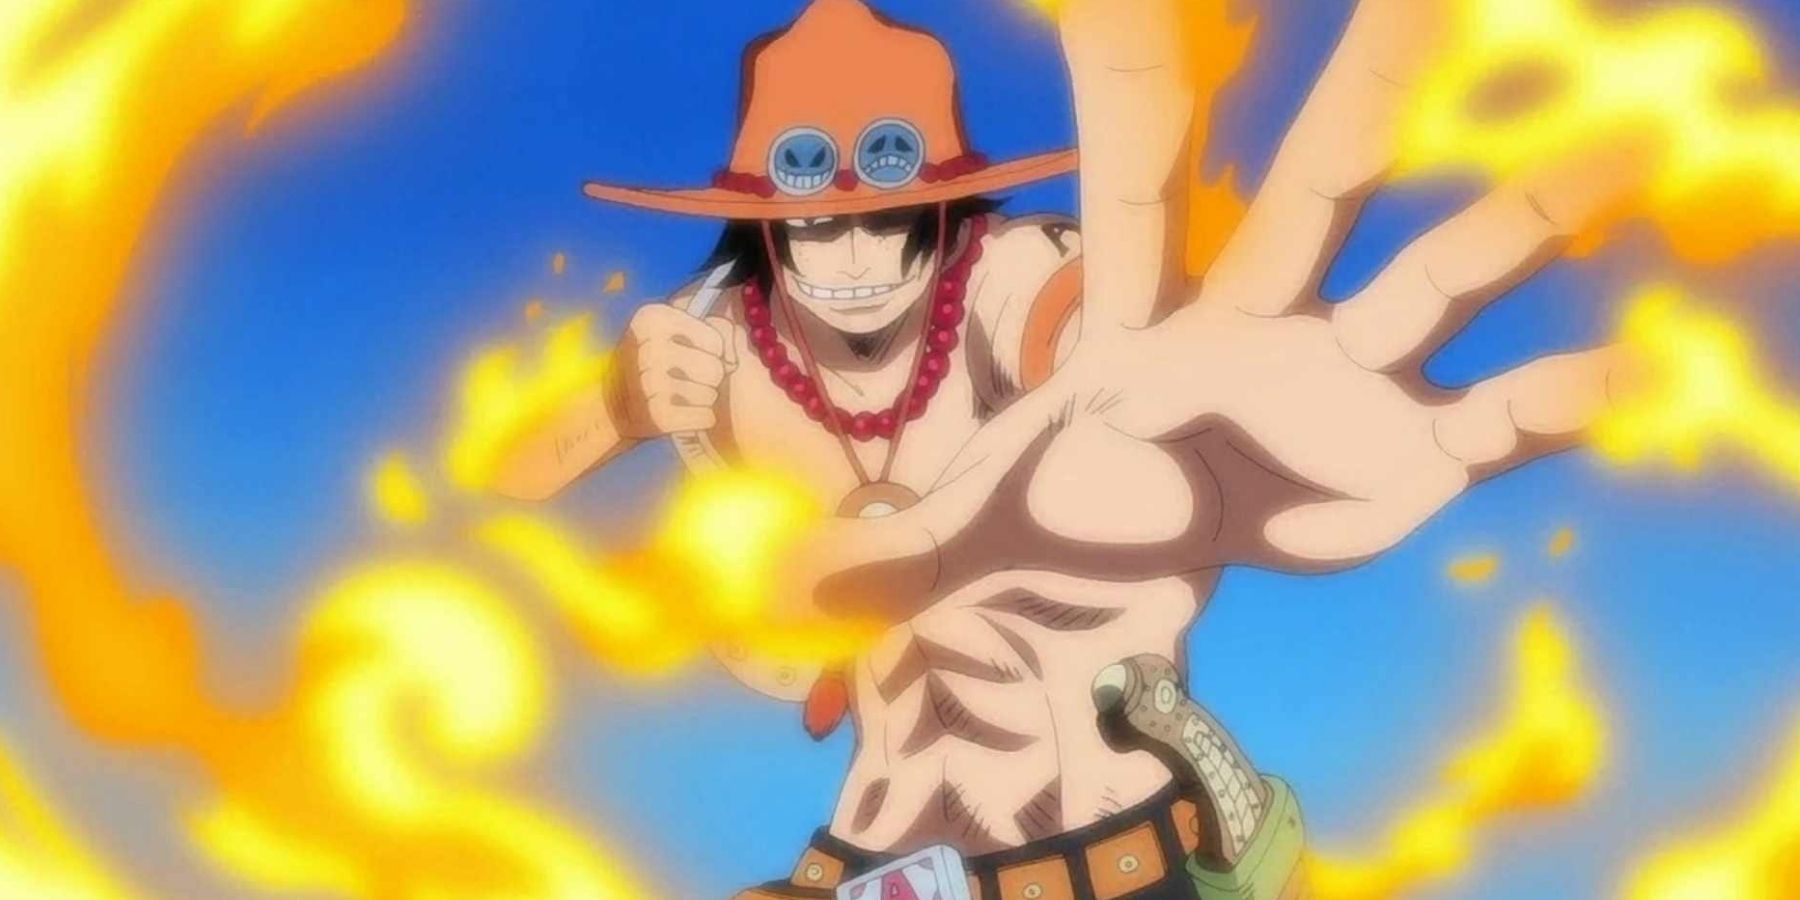 Portgas D. Ace From One Piece